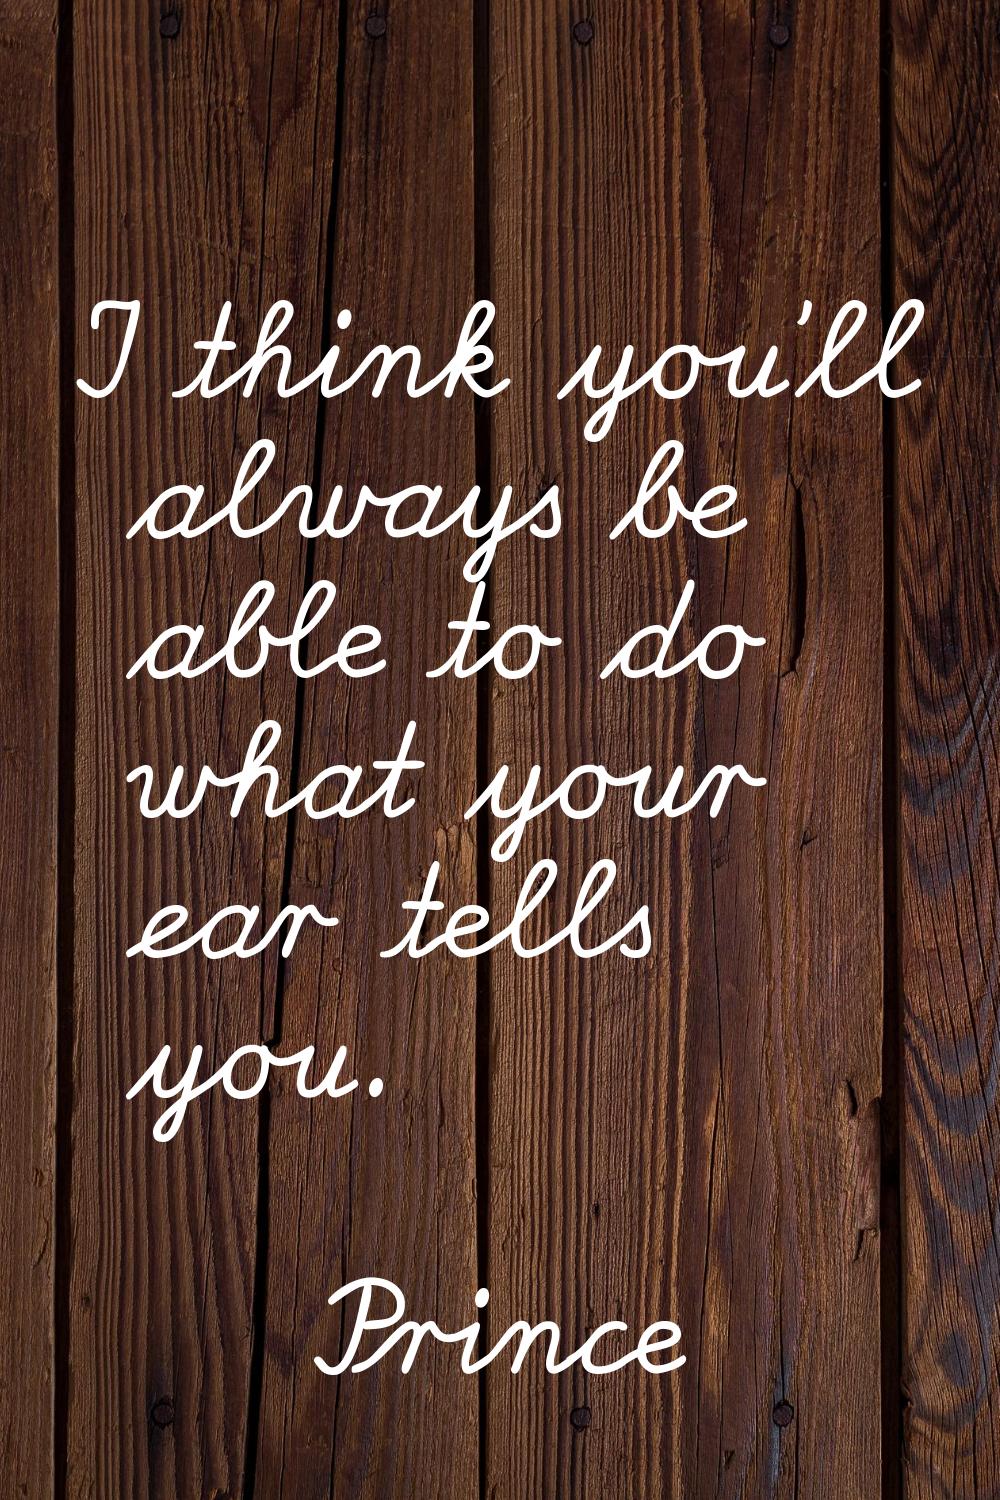 I think you'll always be able to do what your ear tells you.